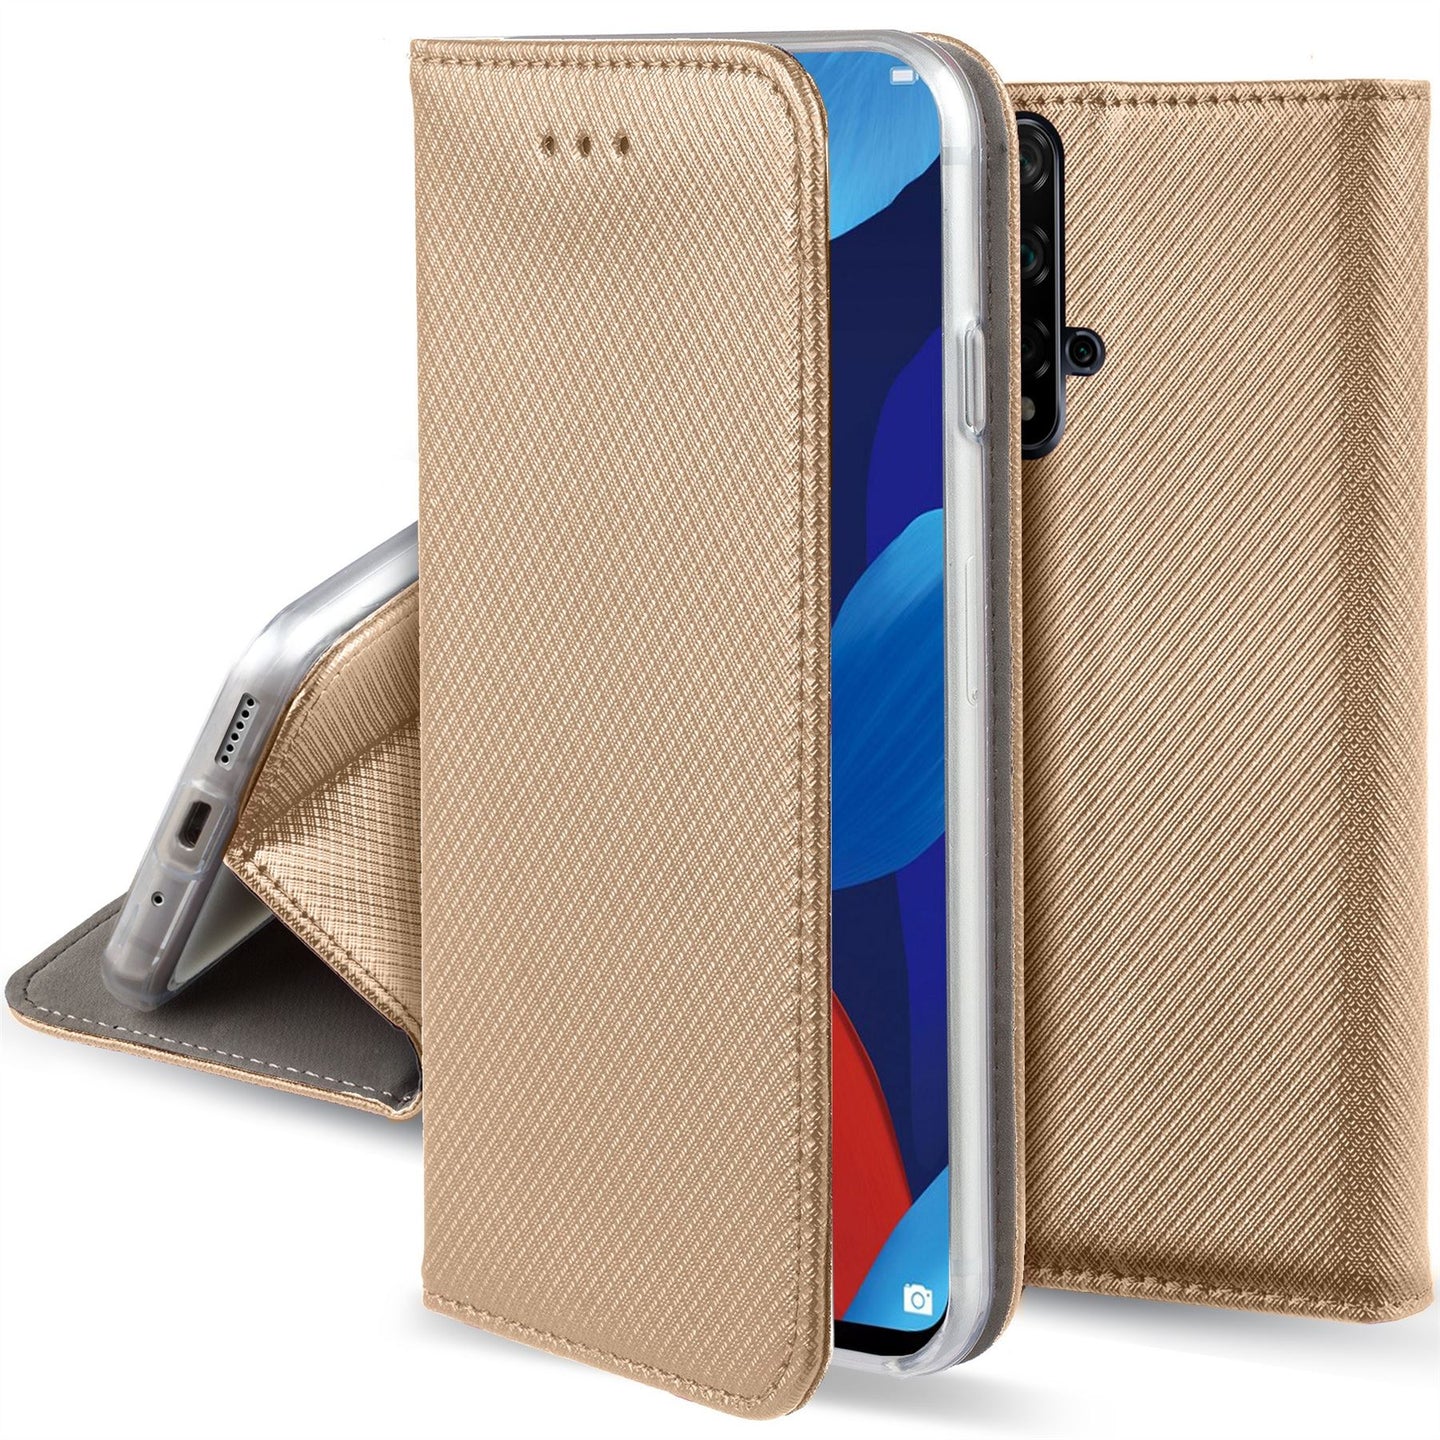 Moozy Case Flip Cover for Huawei Nova 5T and Honor 20, Gold - Smart Magnetic Flip Case with Card Holder and Stand